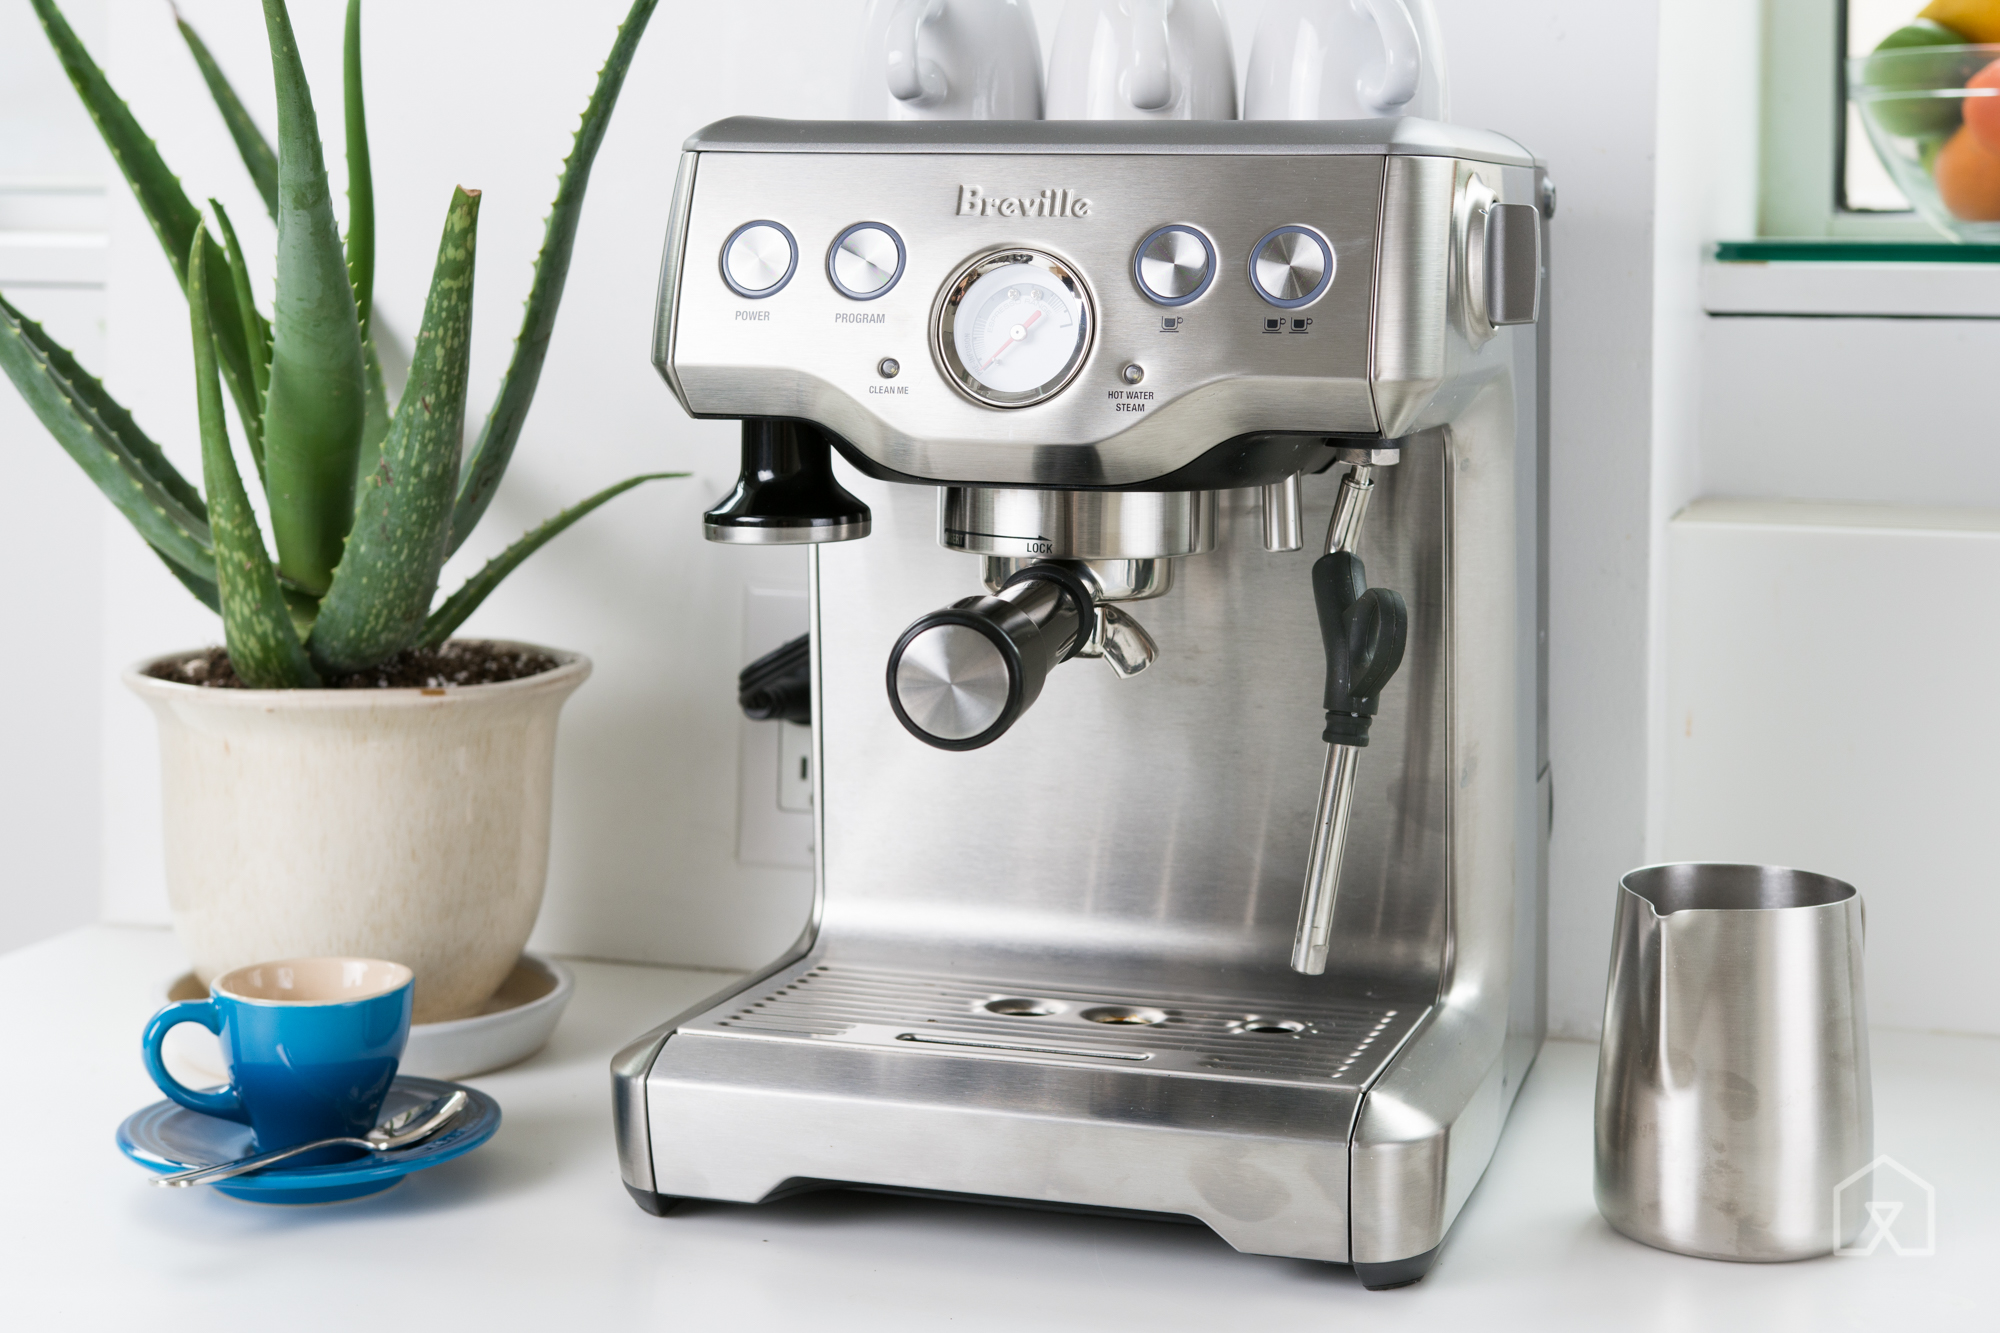 The best espresso machine, grinder and accessories for beginners